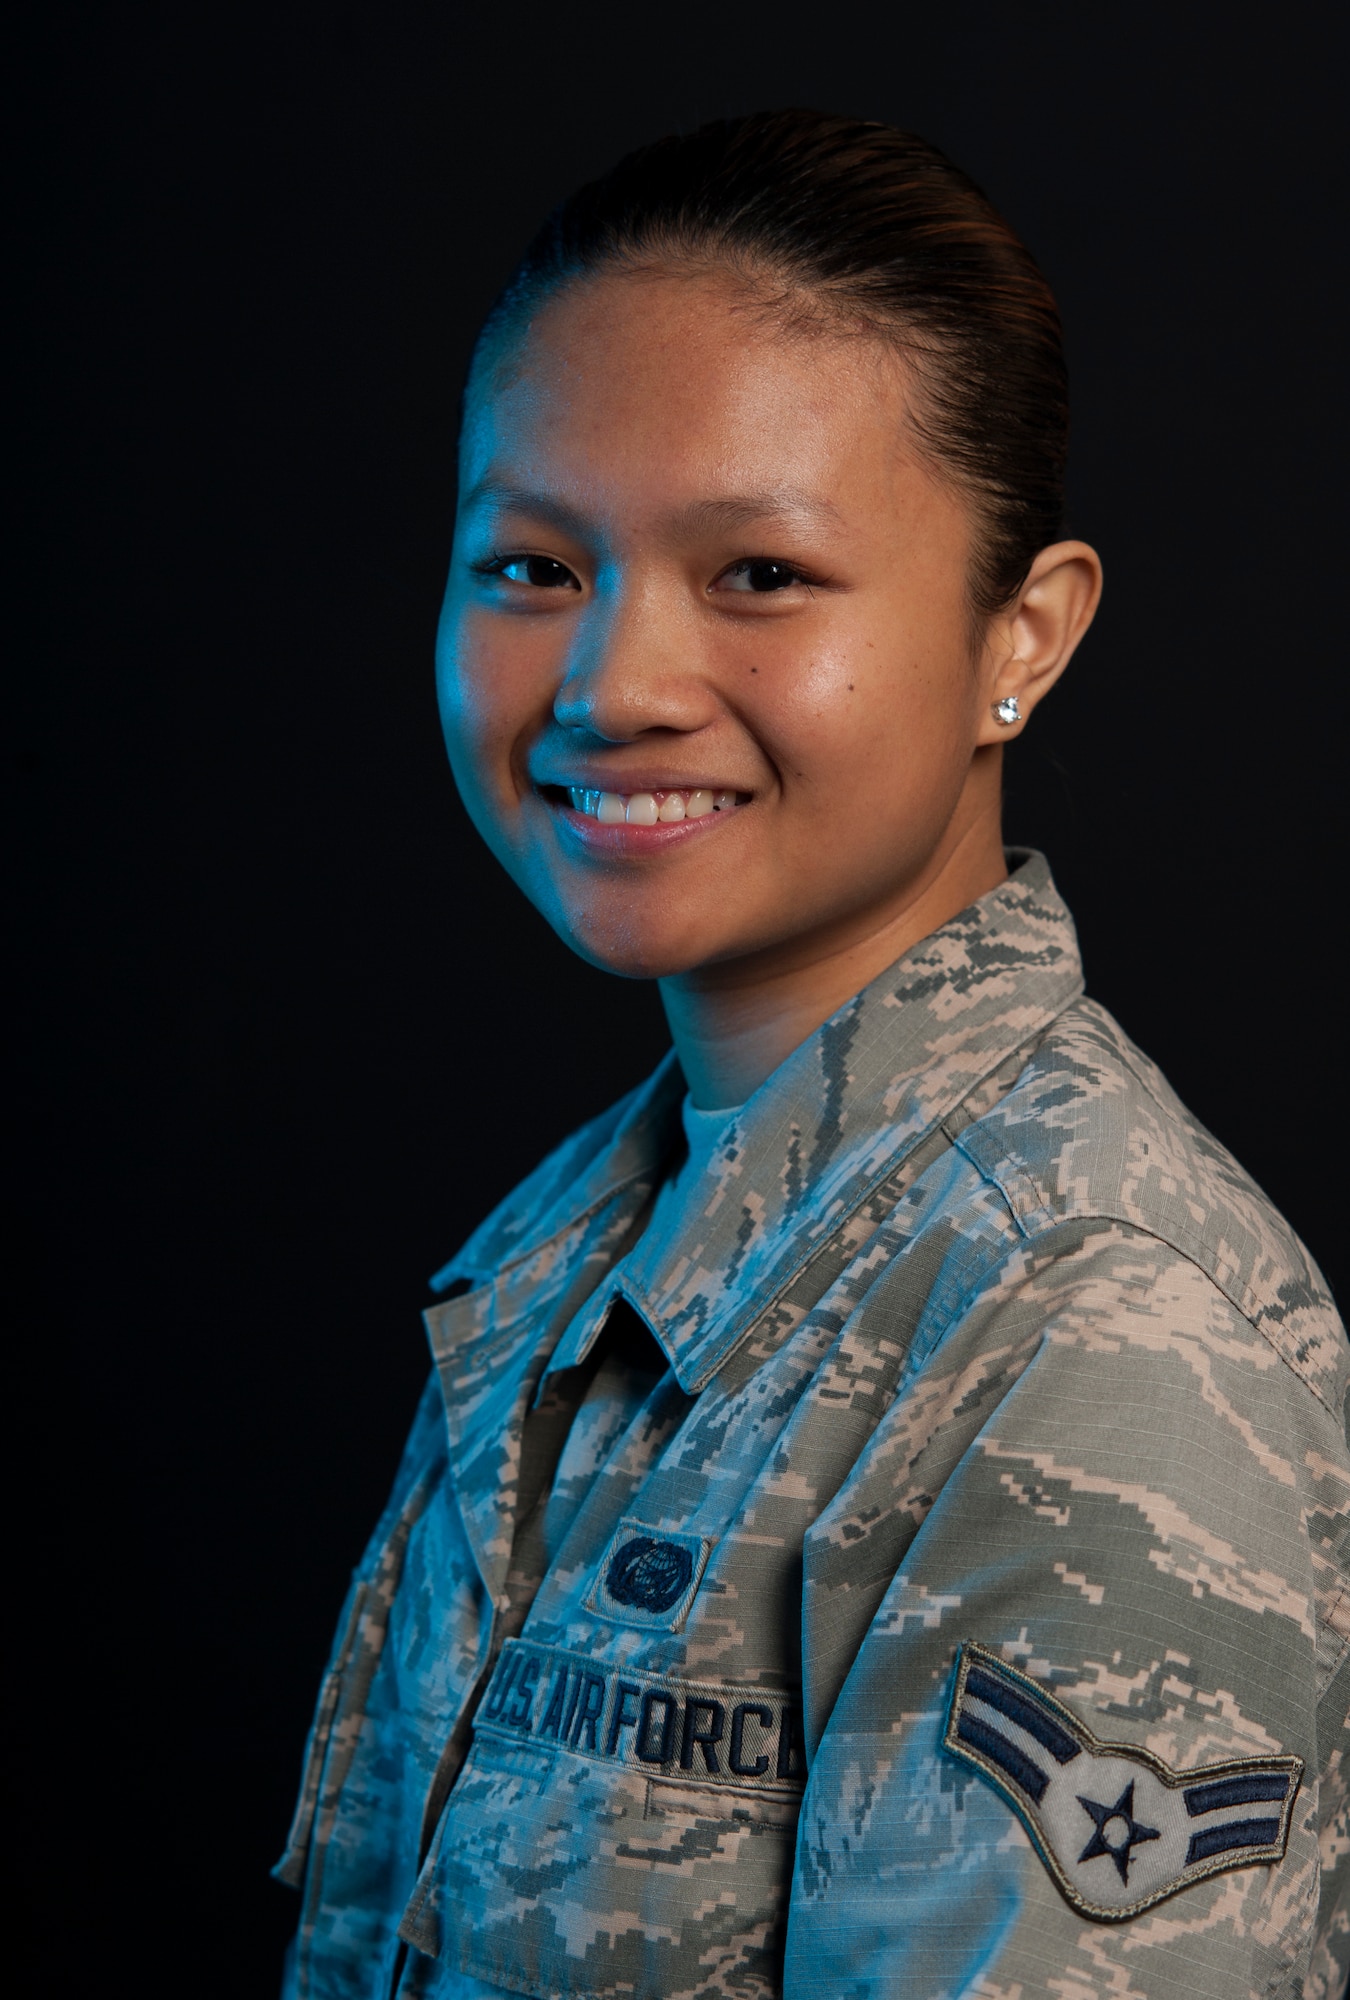 Airman 1st Class Elaiza Jane Andora grew up in the Philippines and moved to the United States with her family in 2015, joining the Air Force in 2017.